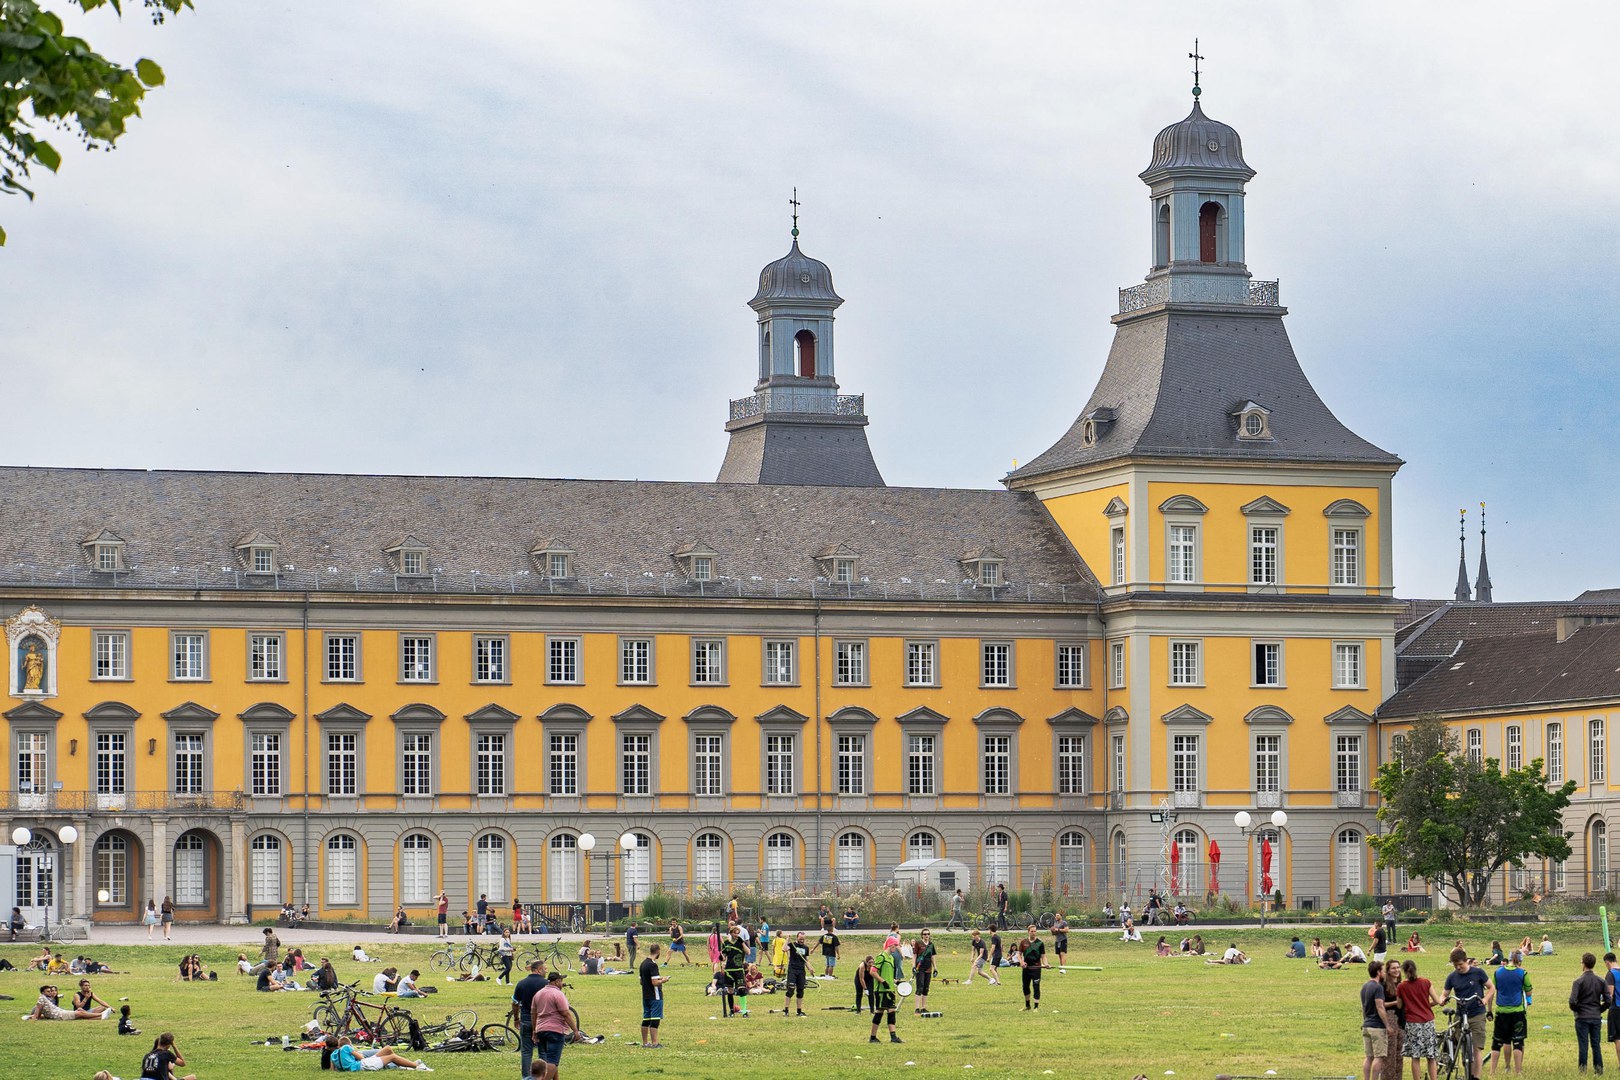 University of Bonn with excellent result in THE WUR. - The University of Bonn came in 91st globally and 6th in Germany, putting it in the world’s top 100 universities.